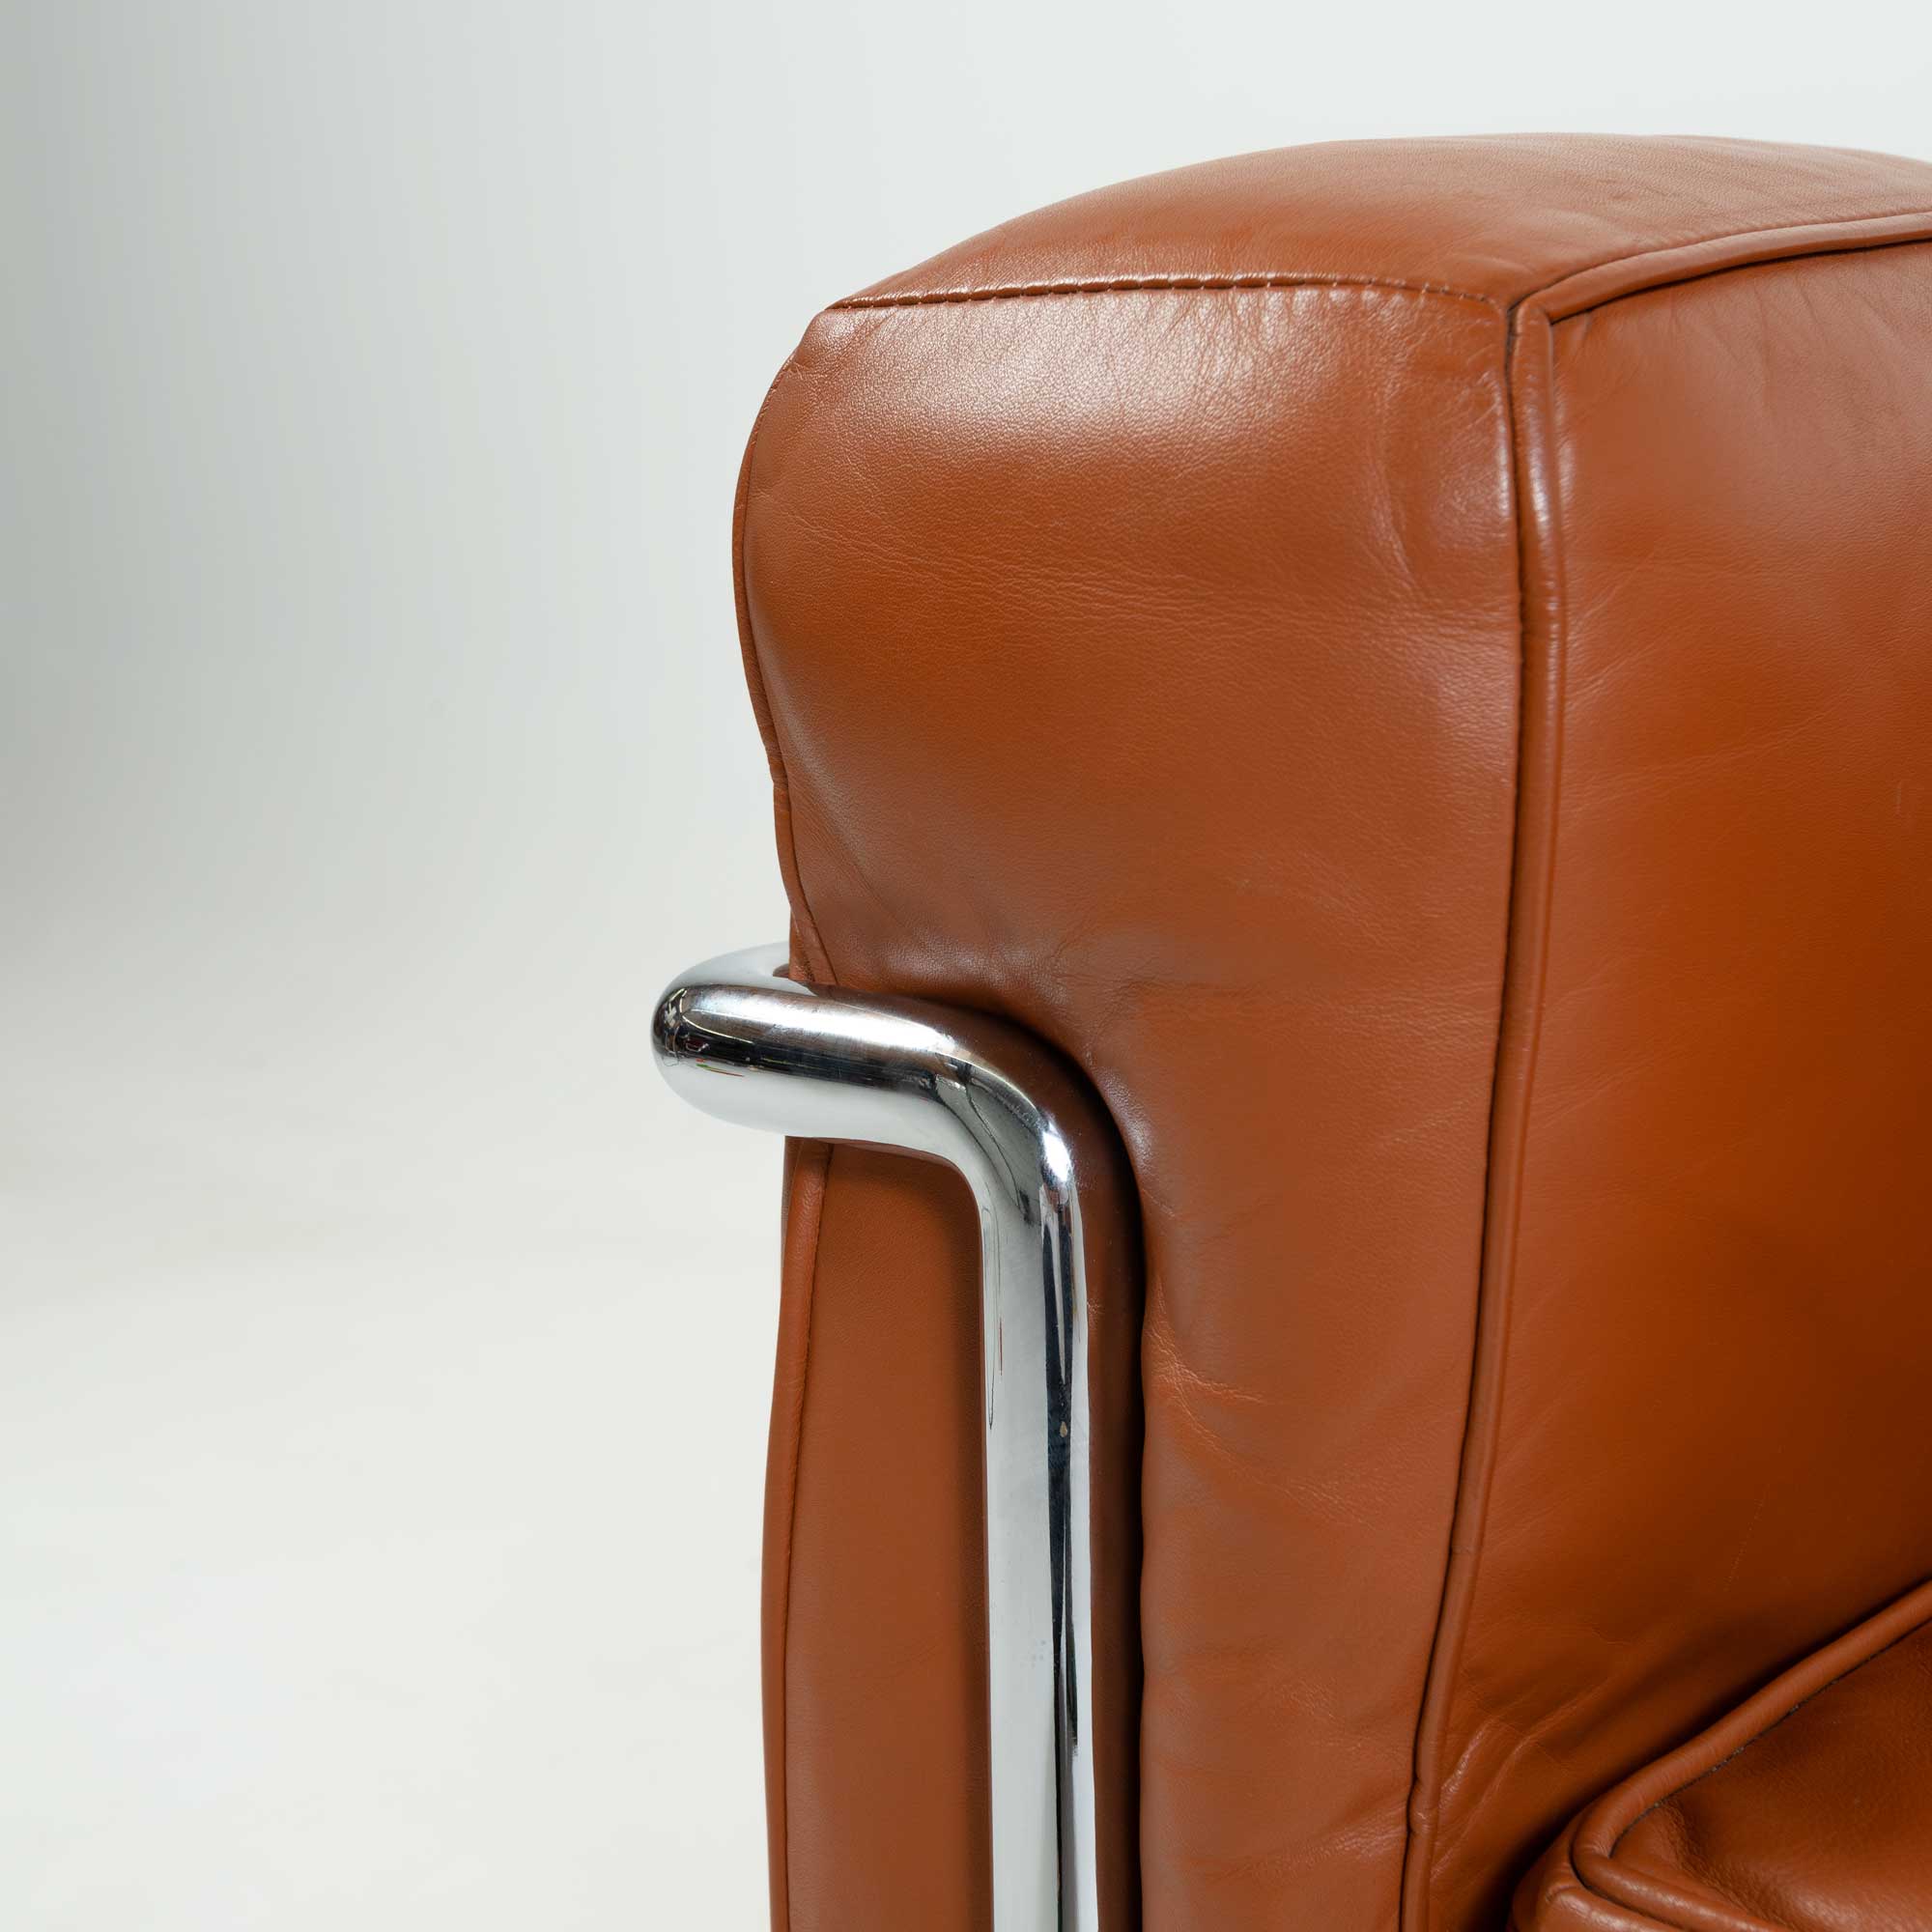 LC2 Petite Modele Armchair by Le Corbusier Cassina in Original Tobacco Leather